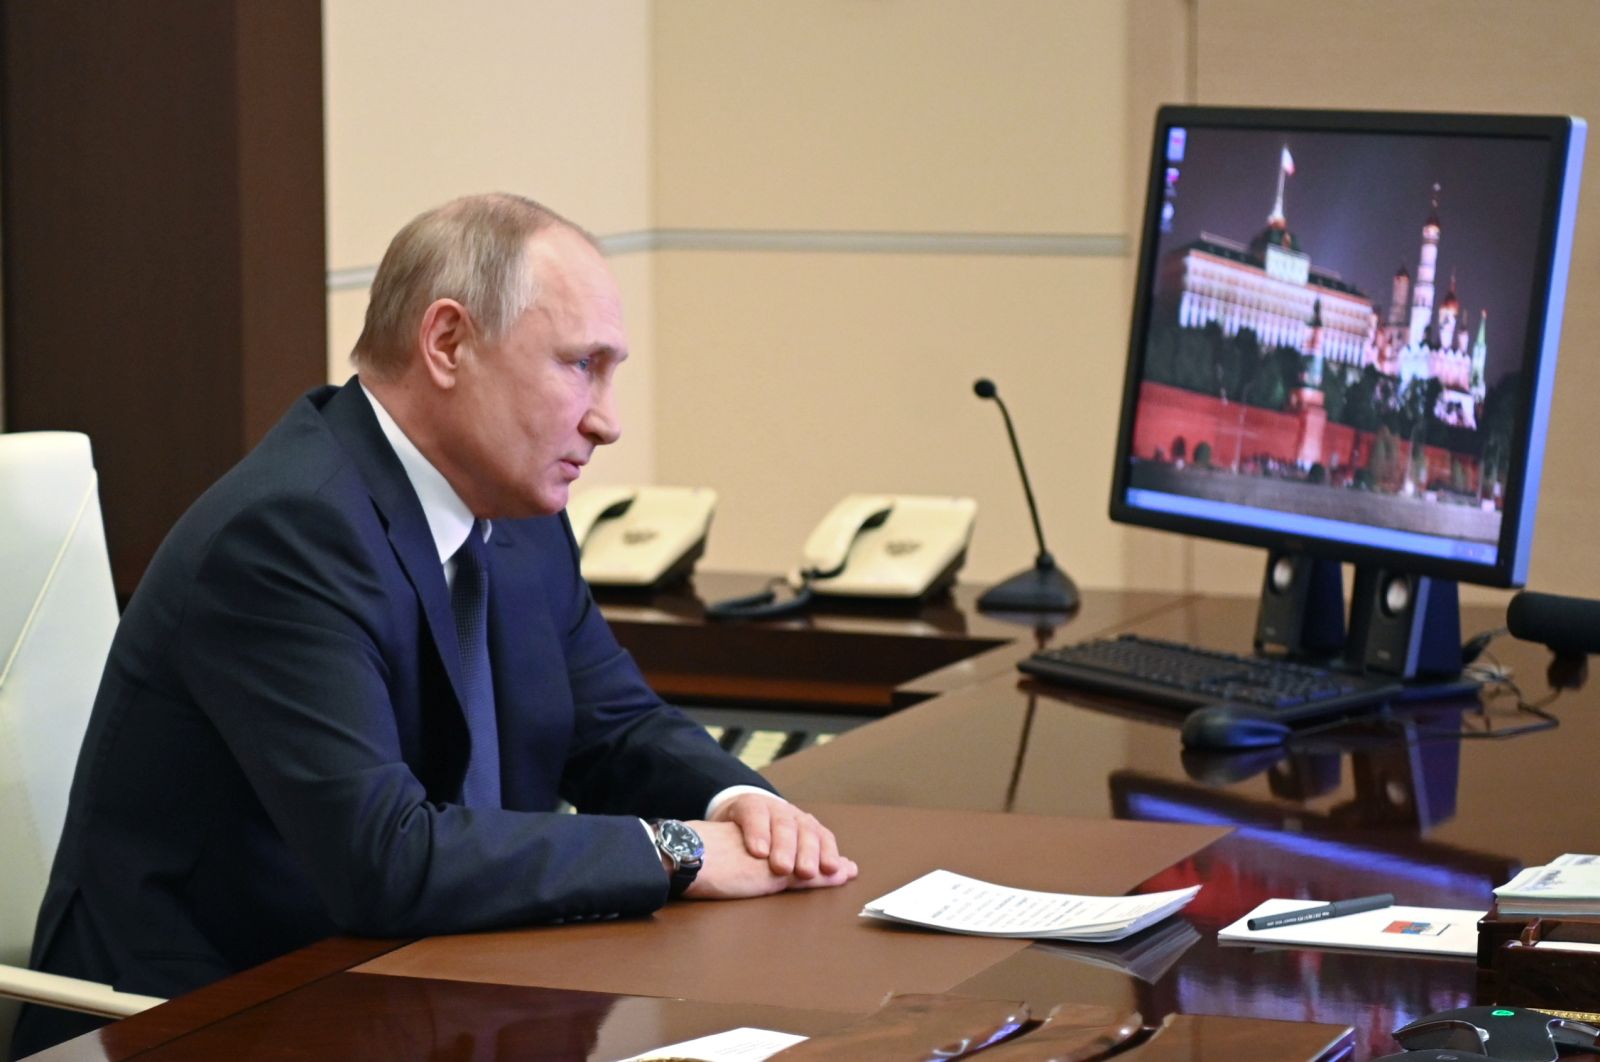 epa09799484 Russian President Vladimir Putin chairs a meeting with members of the Russian Security Council via teleconference call at the Novo-Ogaryovo state residence outside Moscow, Russia, 03 March 2022. Russian troops entered Ukraine on 24 February prompting the country's president to declare martial law and triggering a series of severe economic sanctions imposed by Western countries on Russia.  EPA/ANDREY GORSHKOV / KREMLIN POOL/SPUTNIK MANDATORY CREDIT